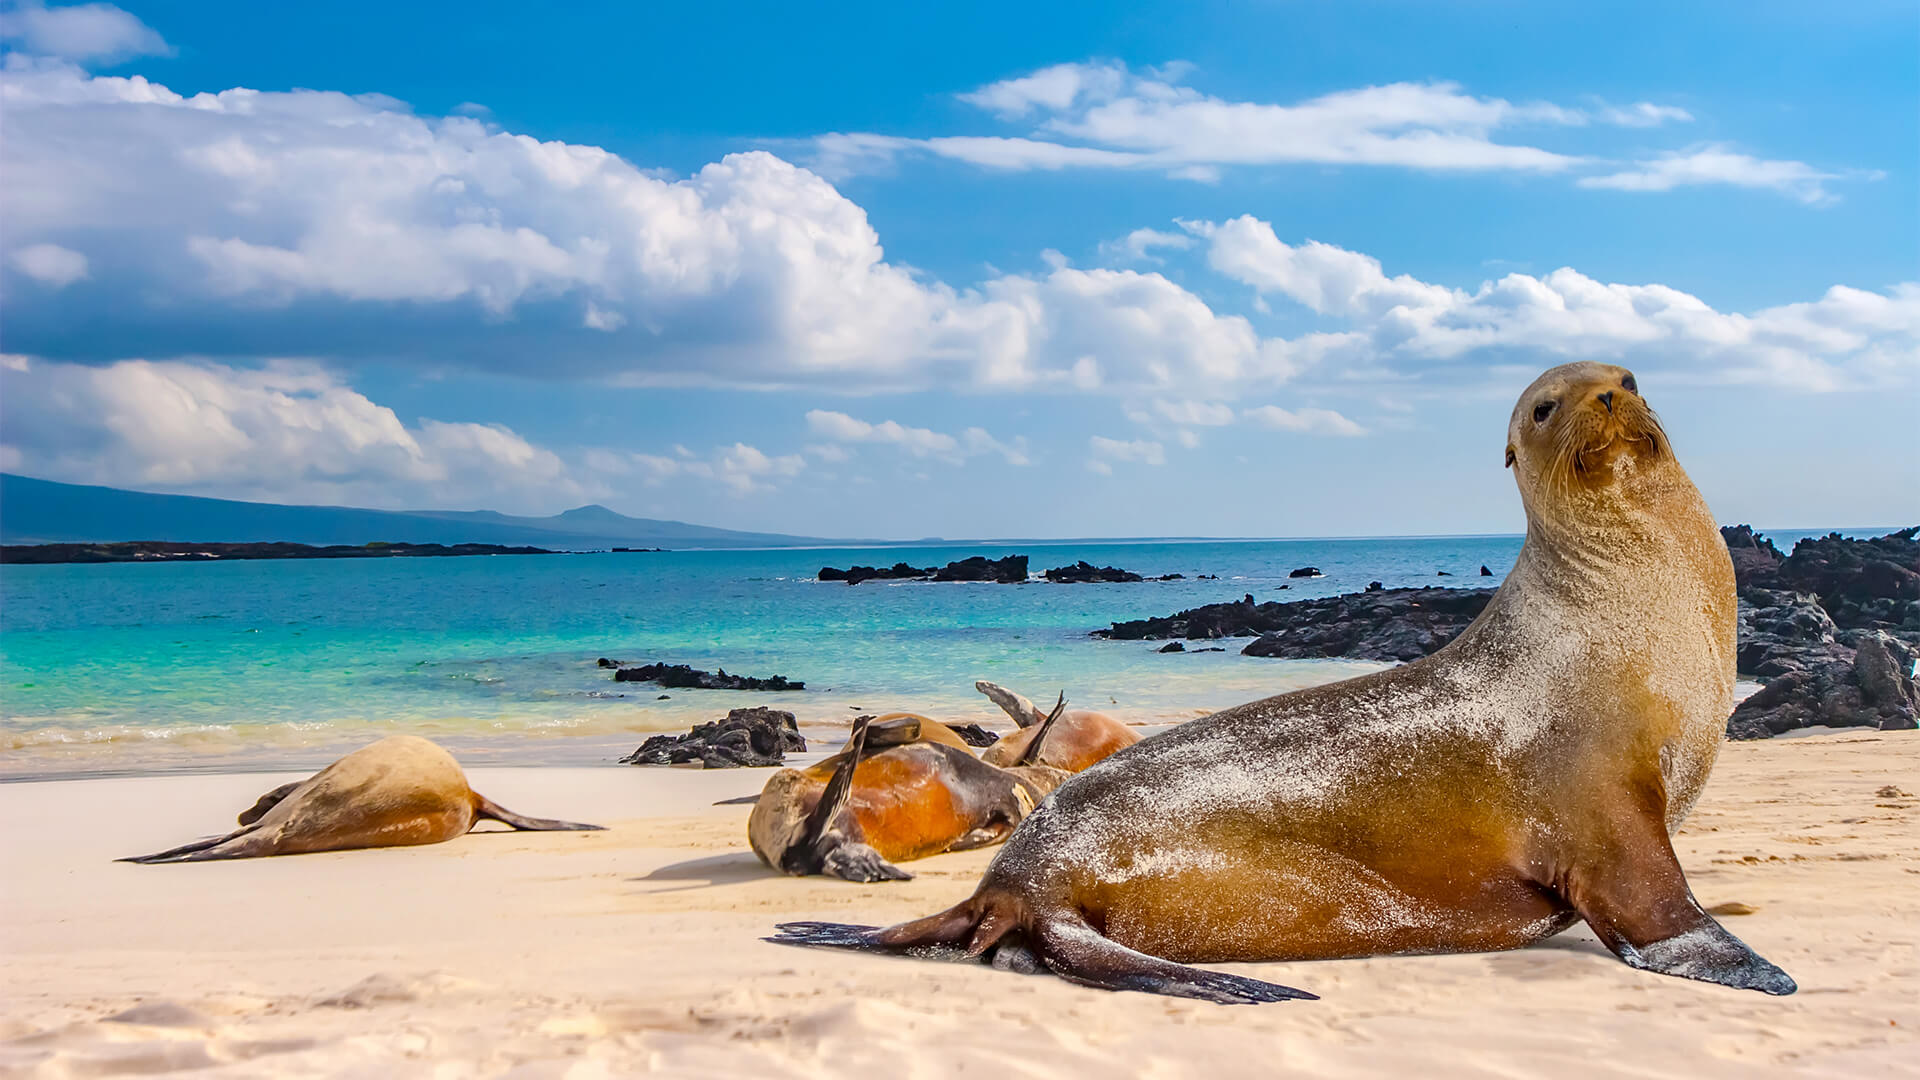 Seals on a beach in the Galapagos Islands